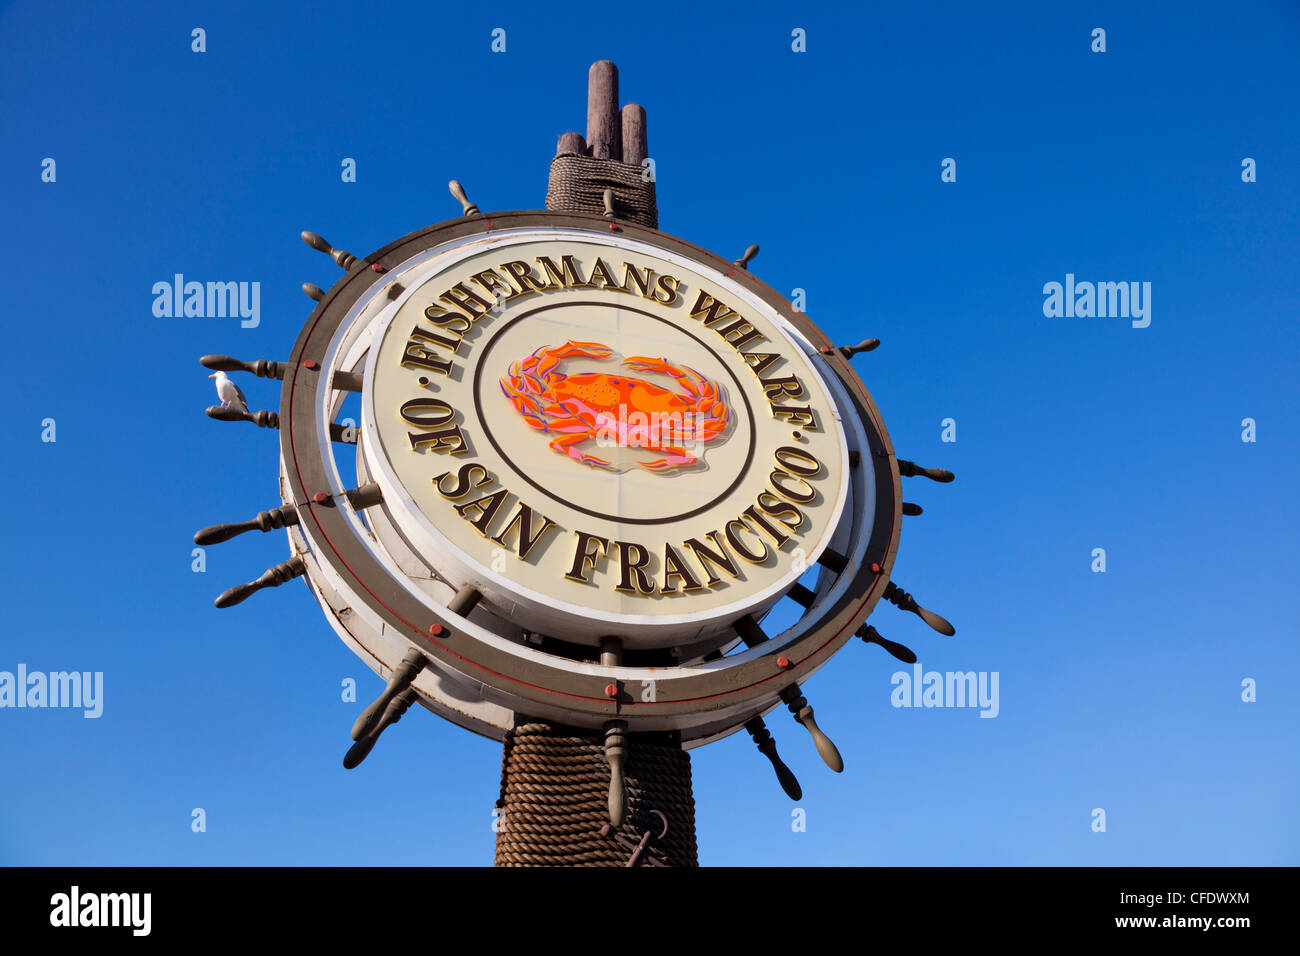 Iconic street sign for the Fisherman's Wharf area, San Francisco, California, United States of America, Stock Photo